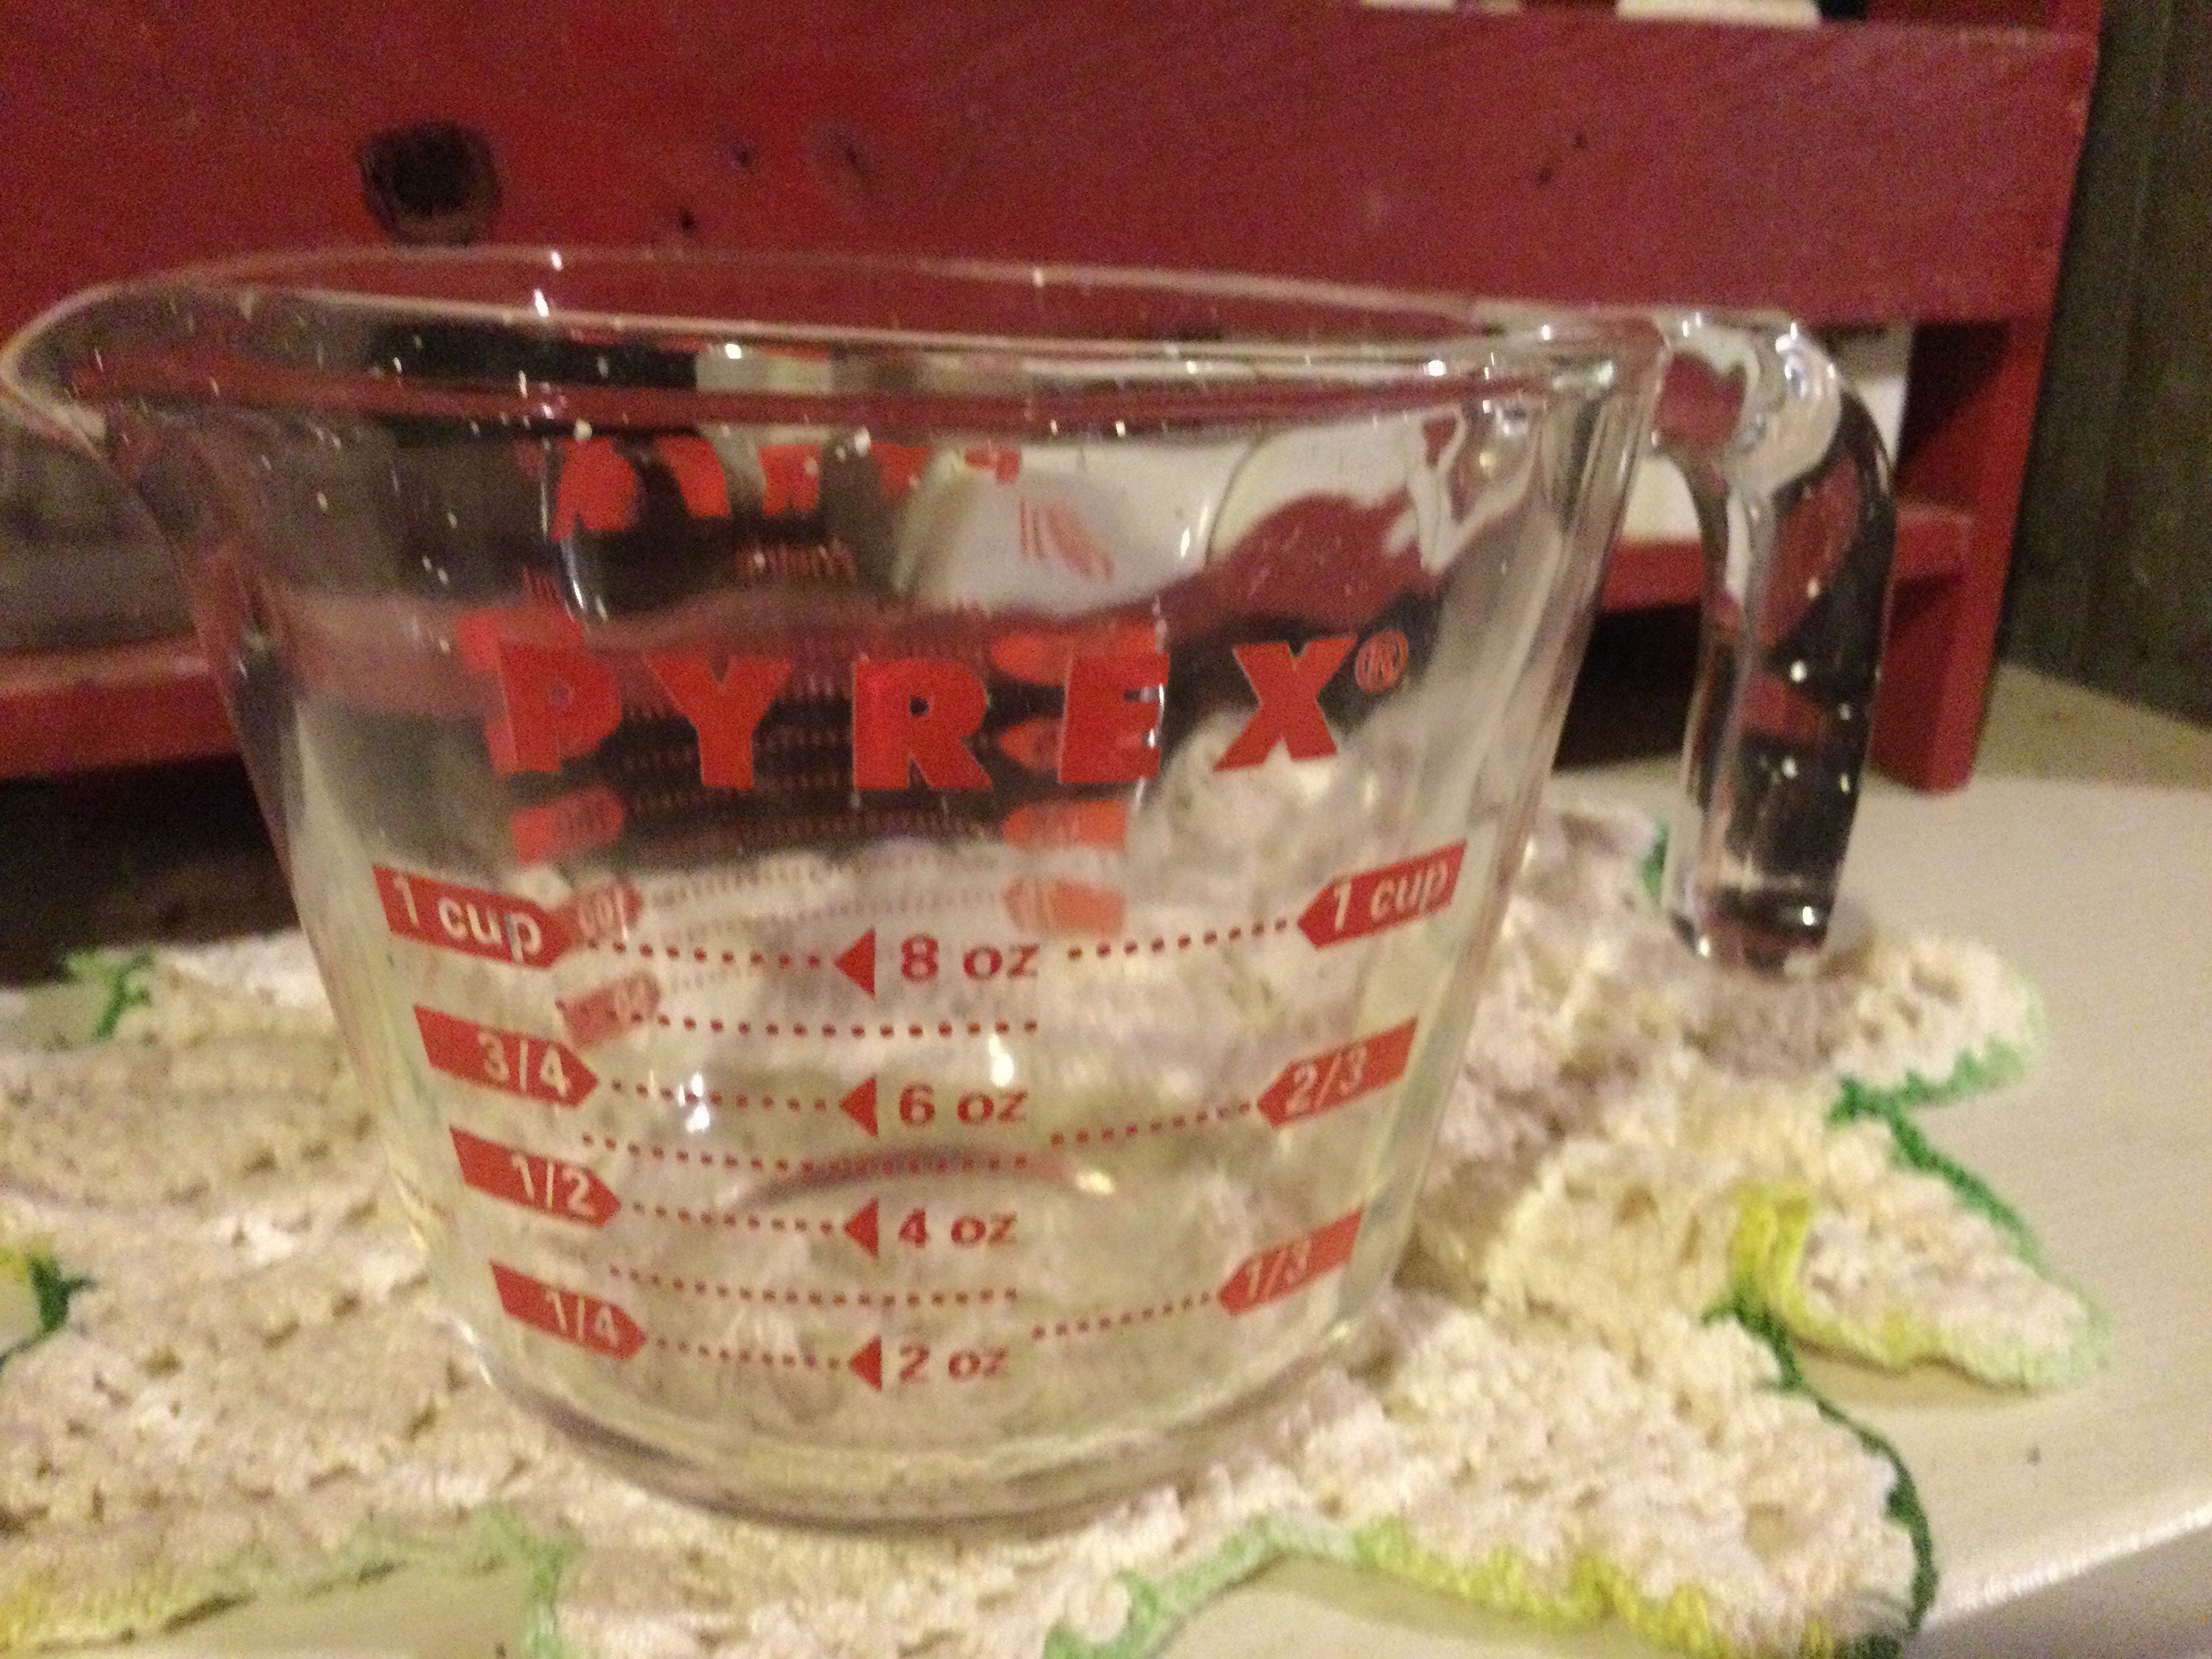 STAR WARS GLASS PYREX 2 CUPS USA MEASURING BAKING CLEAR BLUE HANDLE -  household items - by owner - housewares sale 